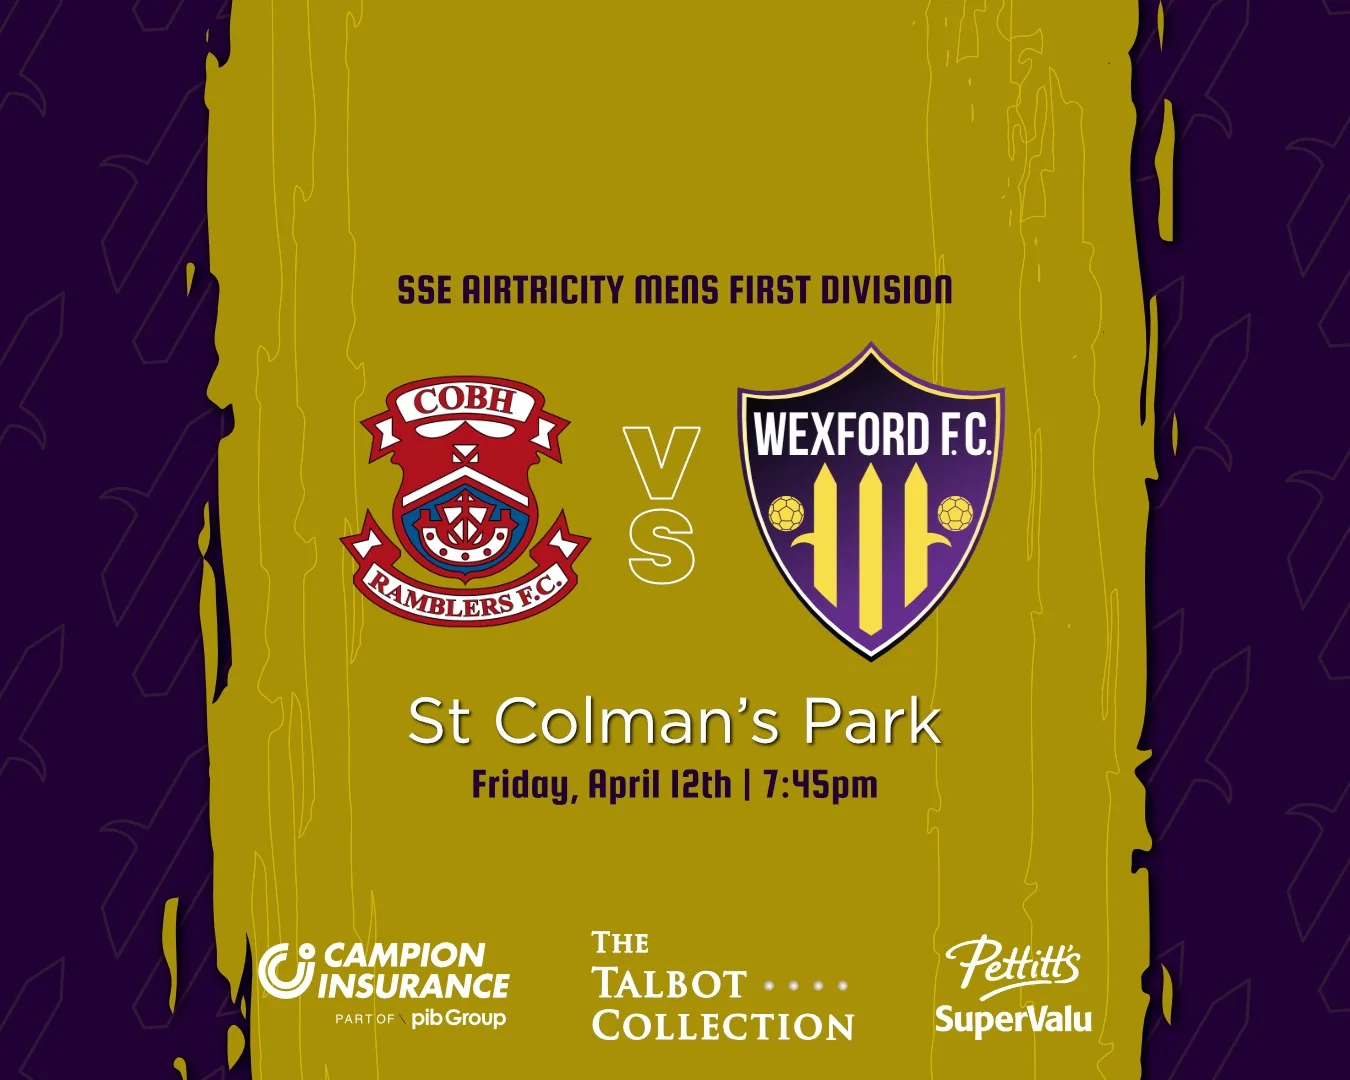 Match Preview: Cobh Ramblers vs Wexford FC